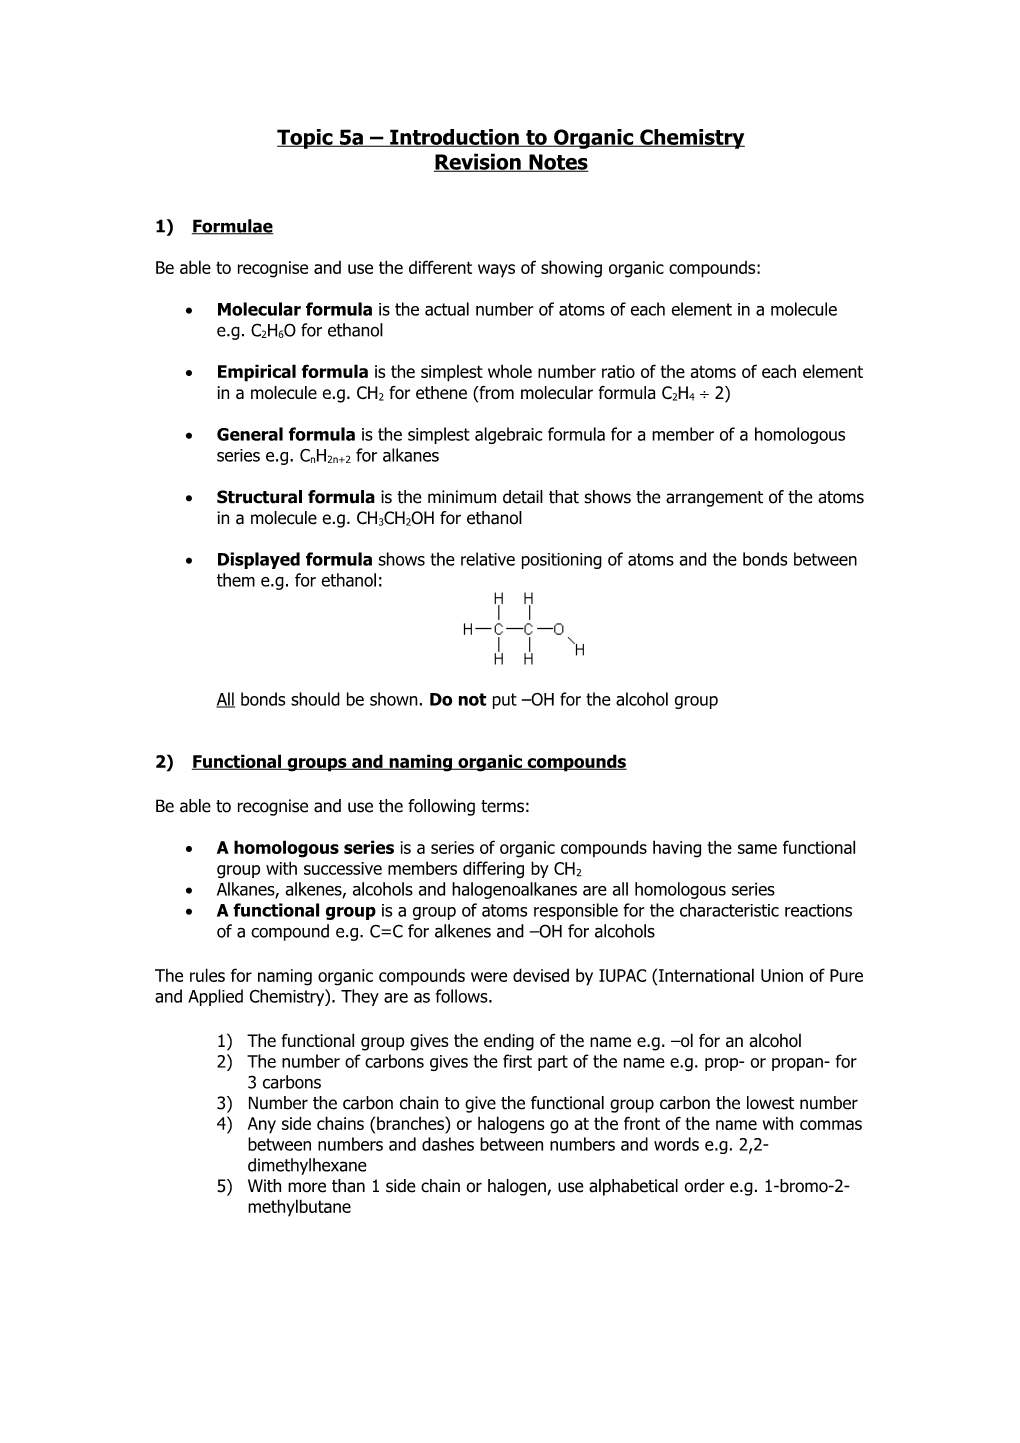 Topic 3 Chemical Structure and Bonding